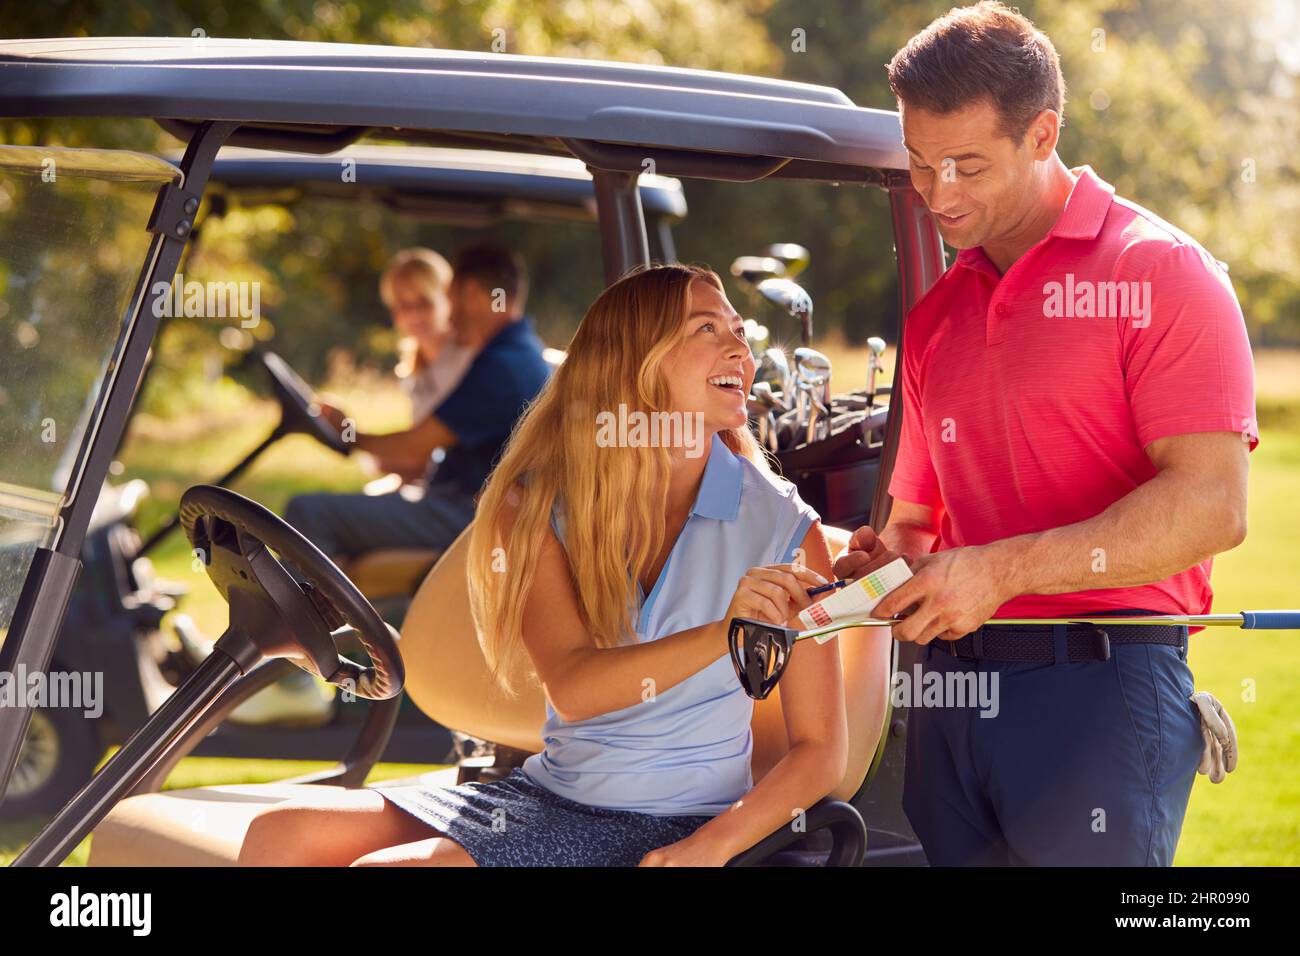 Mature And Mid Adult Couples In Buggies Playing Round On Golf Together Stock Photo